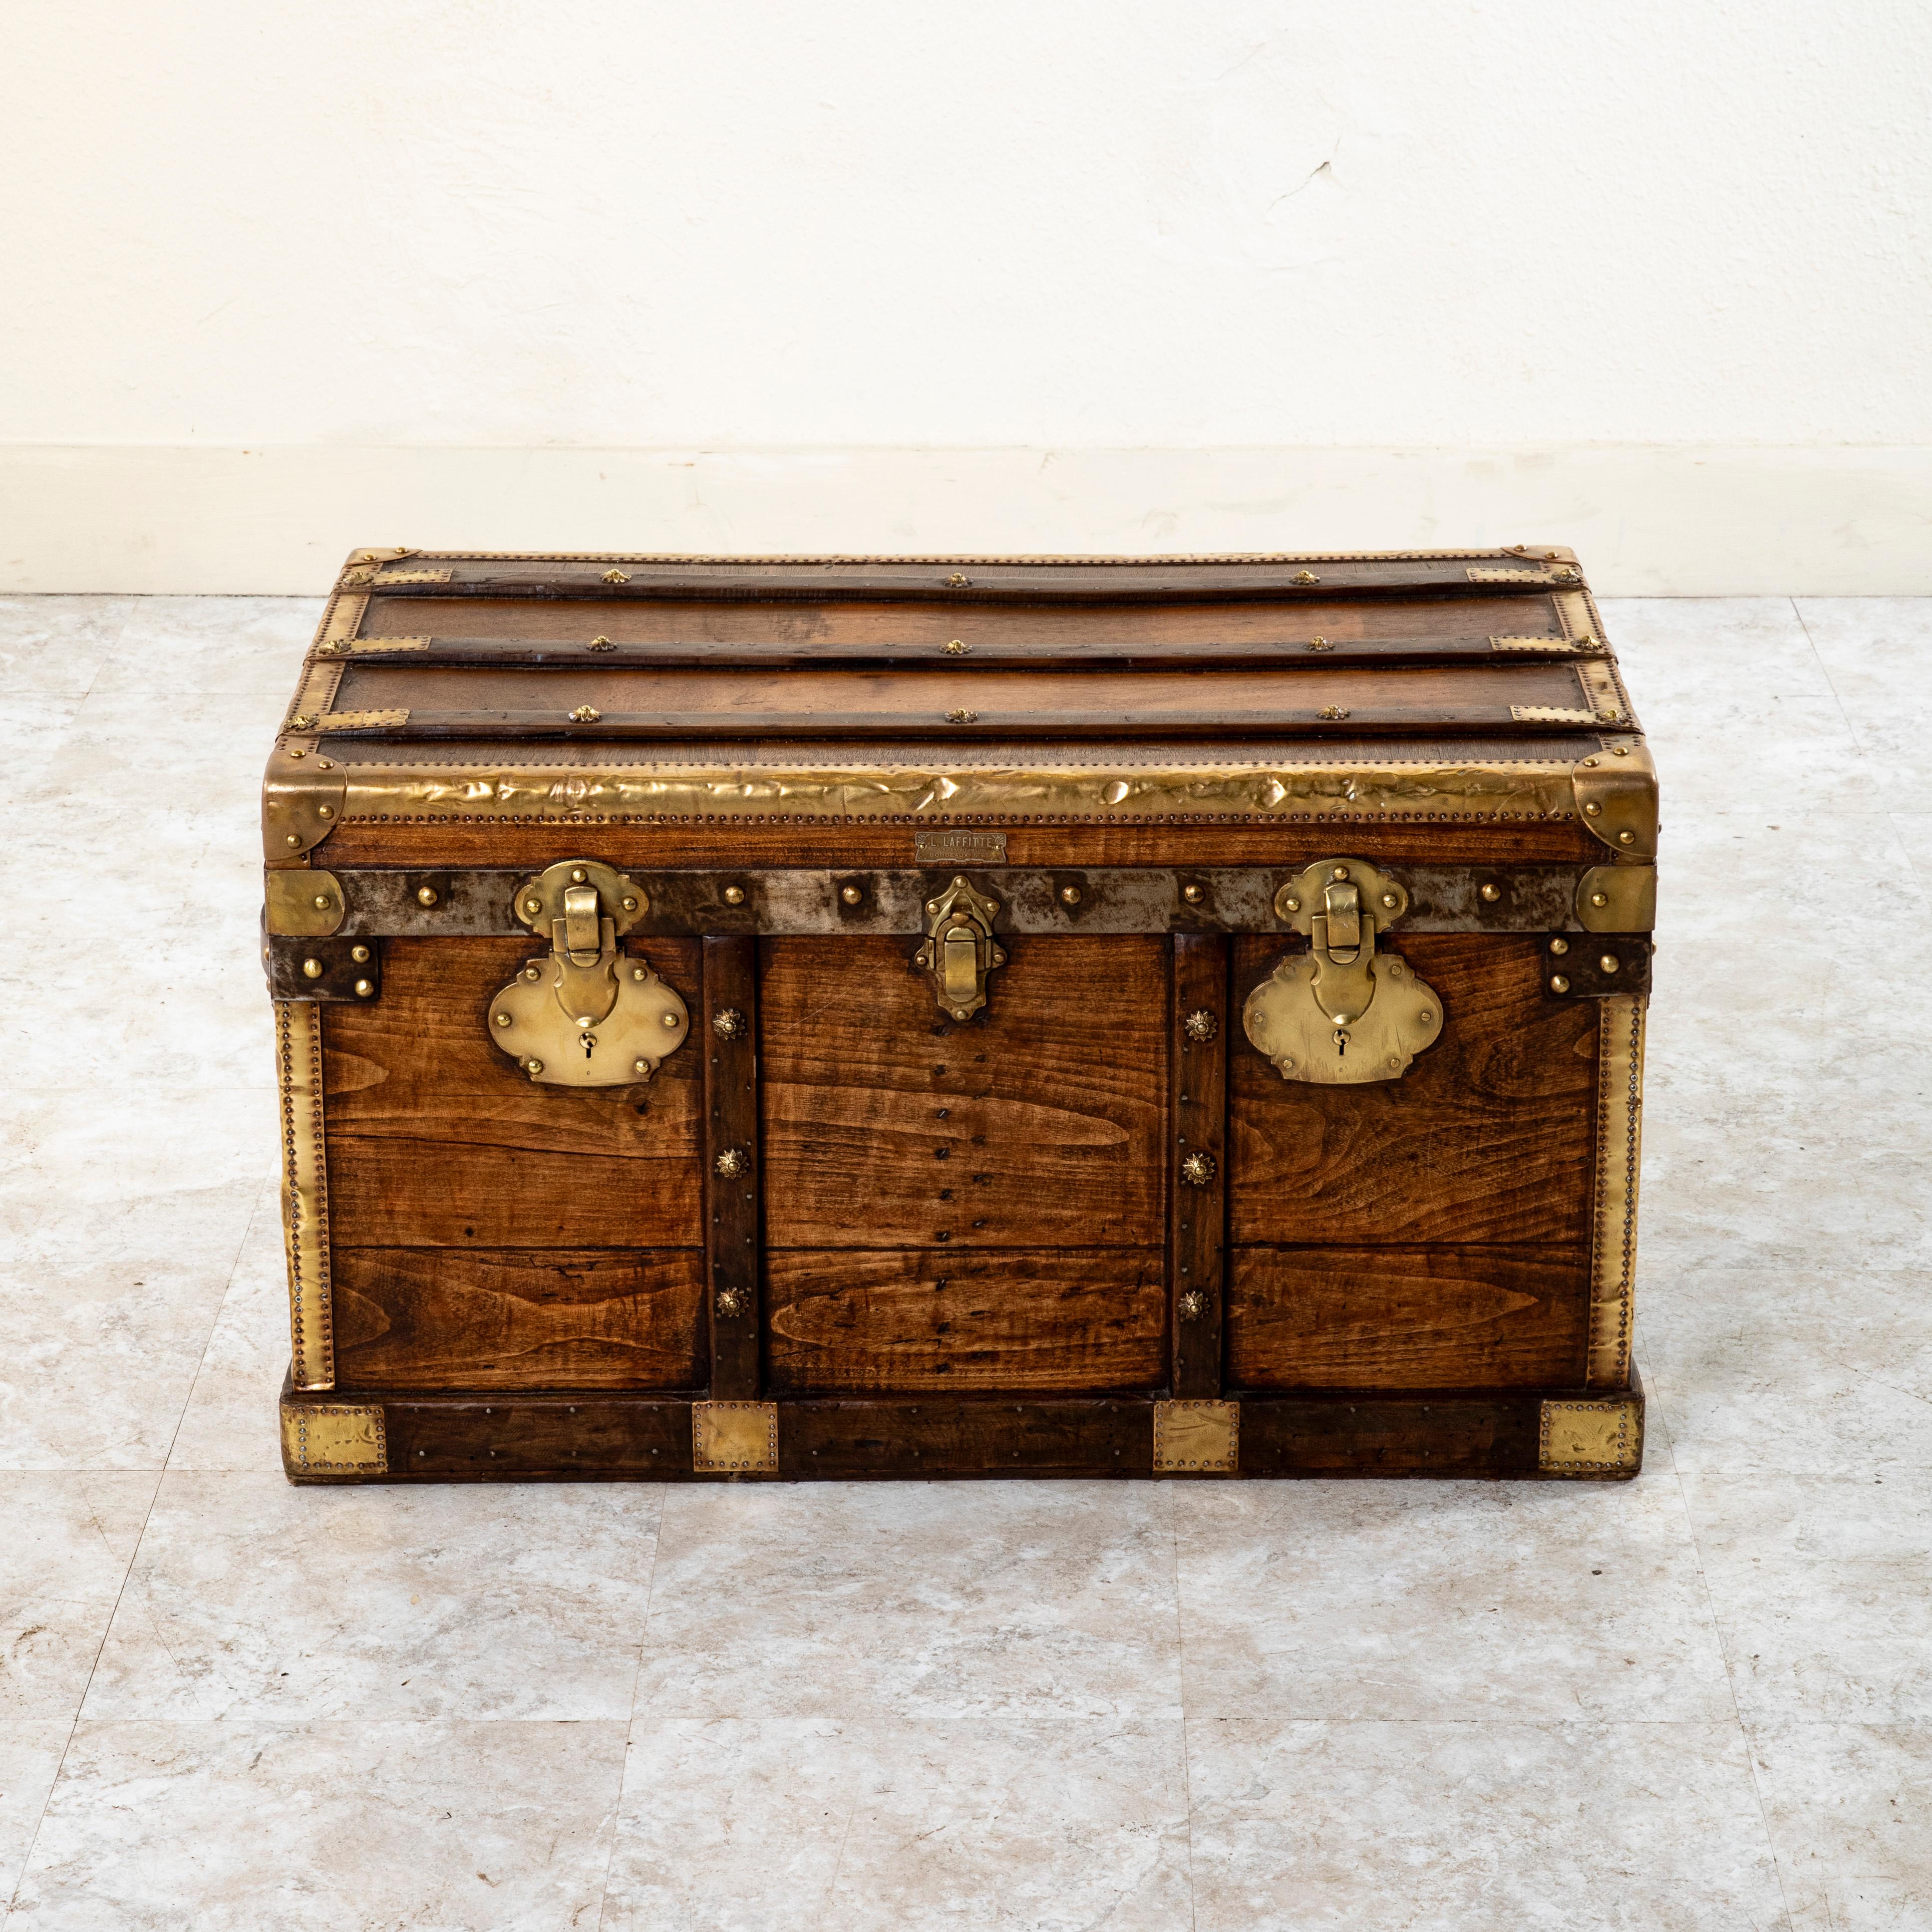 This French wooden steam trunk from the late nineteenth century features locks stamped by the maker, Laffitte, and its address in Bordeaux, 19 Rue Esprits des Lois. Its wooden runners with brass florette rivets and brass corners offered protection